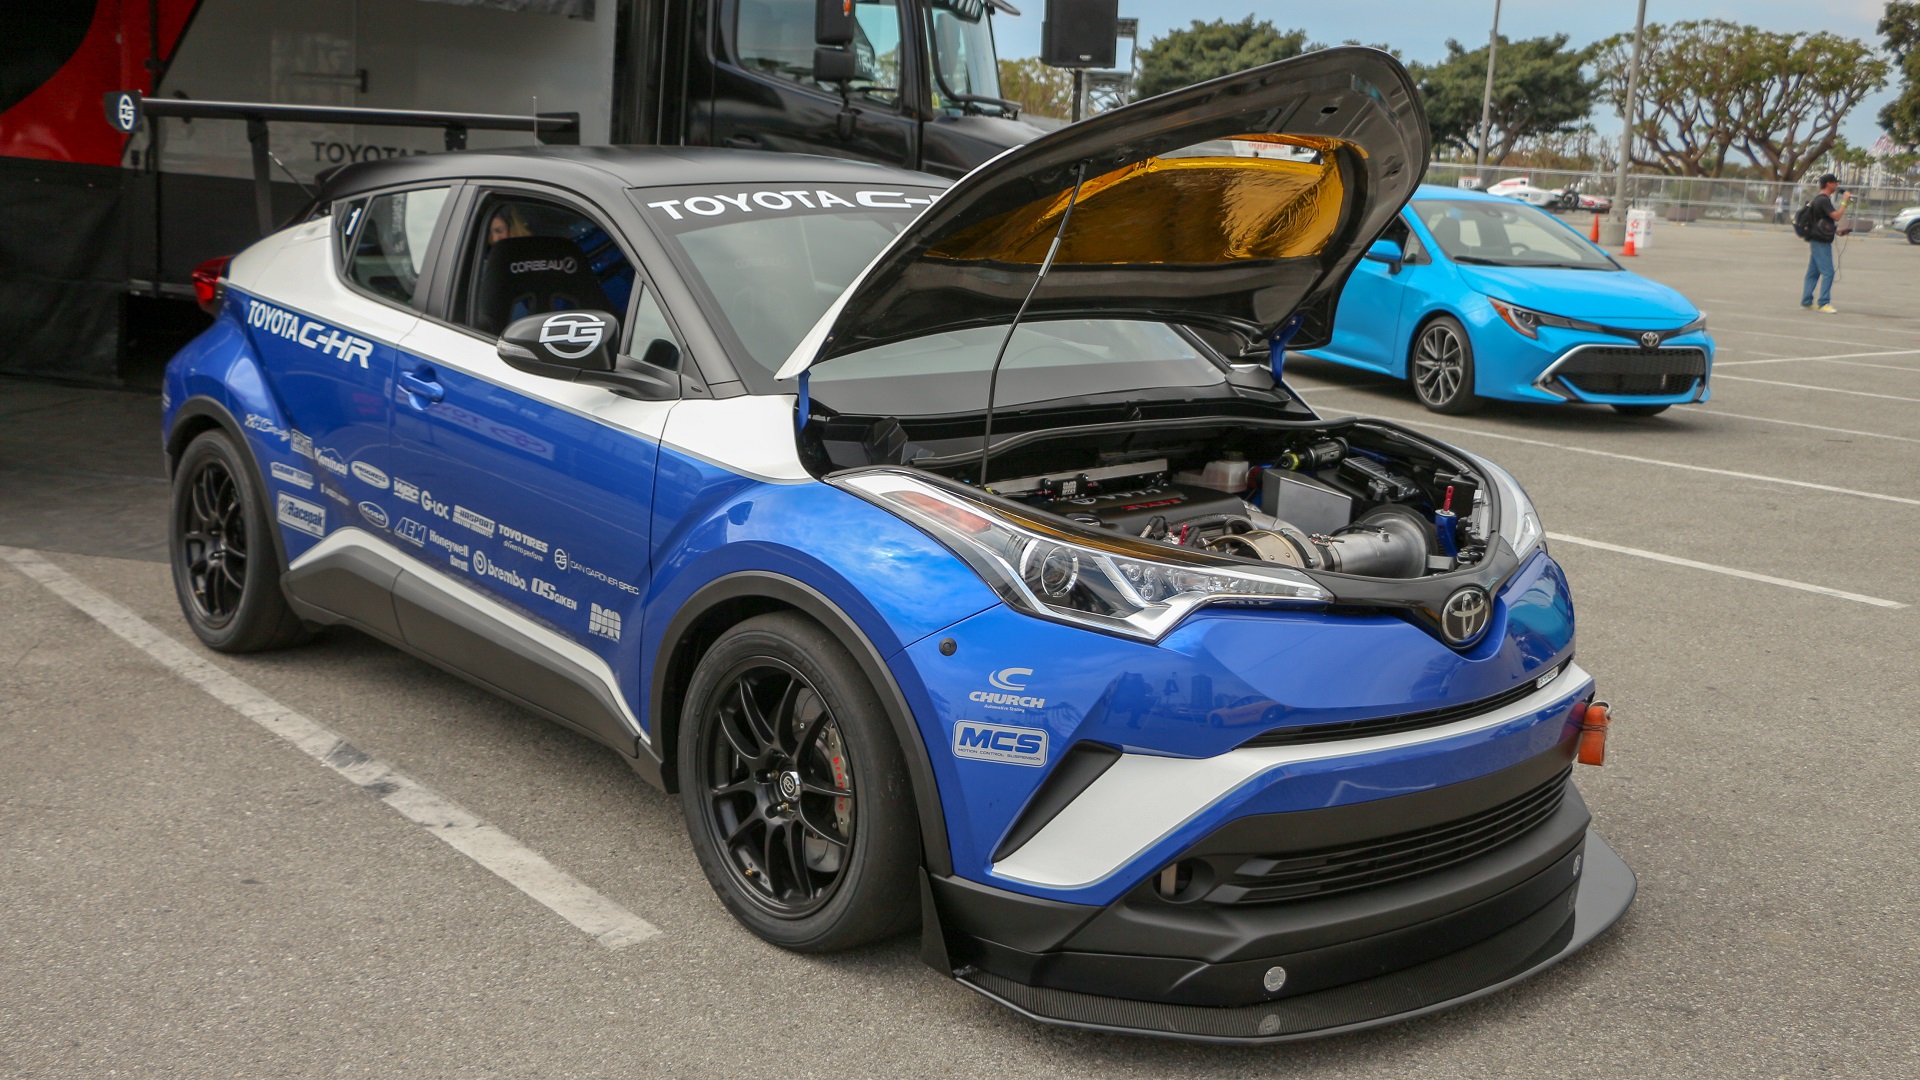 Yotatech.com Toyota C-HR R-Tuned Track Drive Test Review